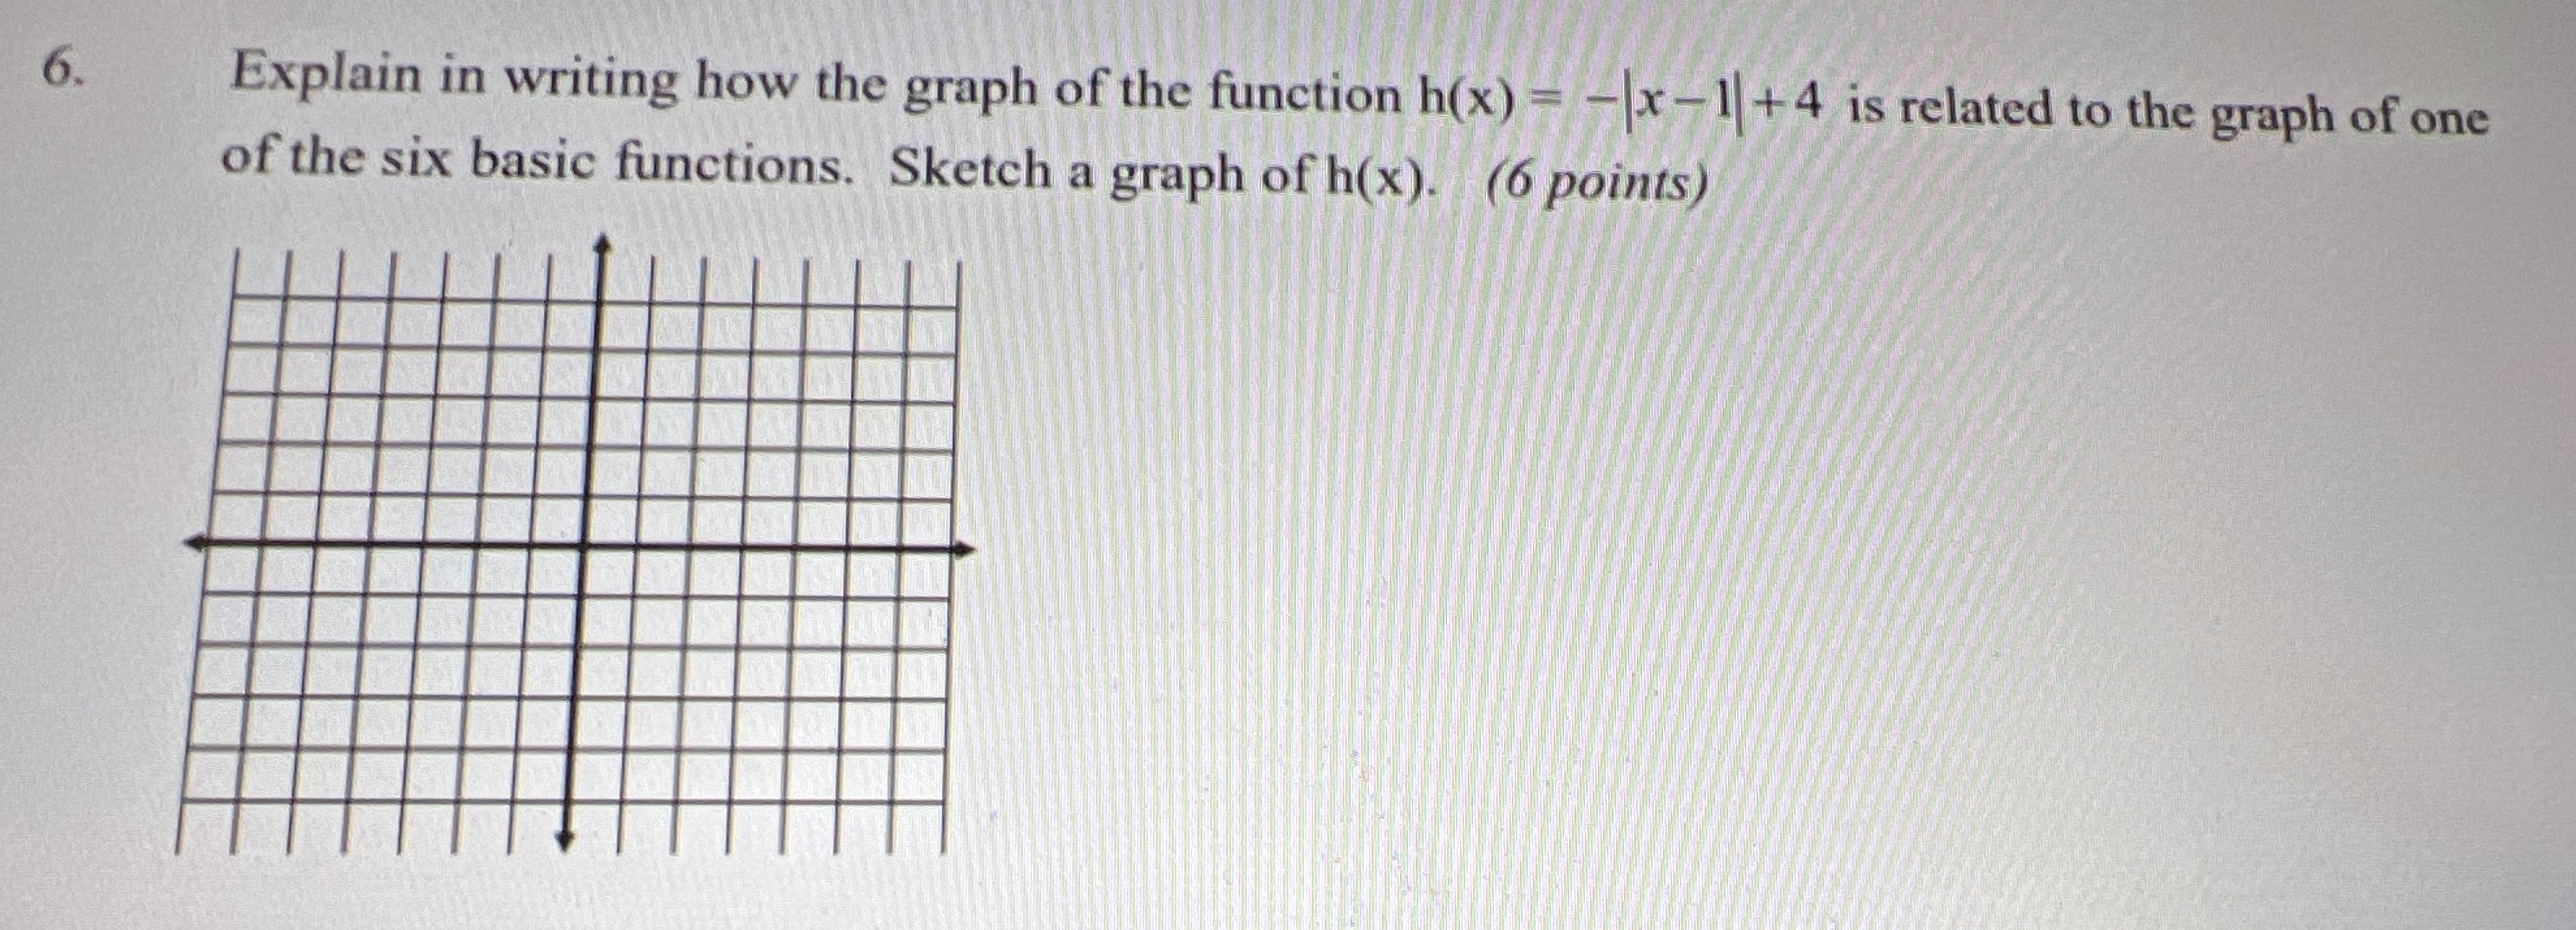 Explain In Writing How The Graph Of The Function H(x) = -|x-1| +4 Is Related To The Graph Of Oneof The